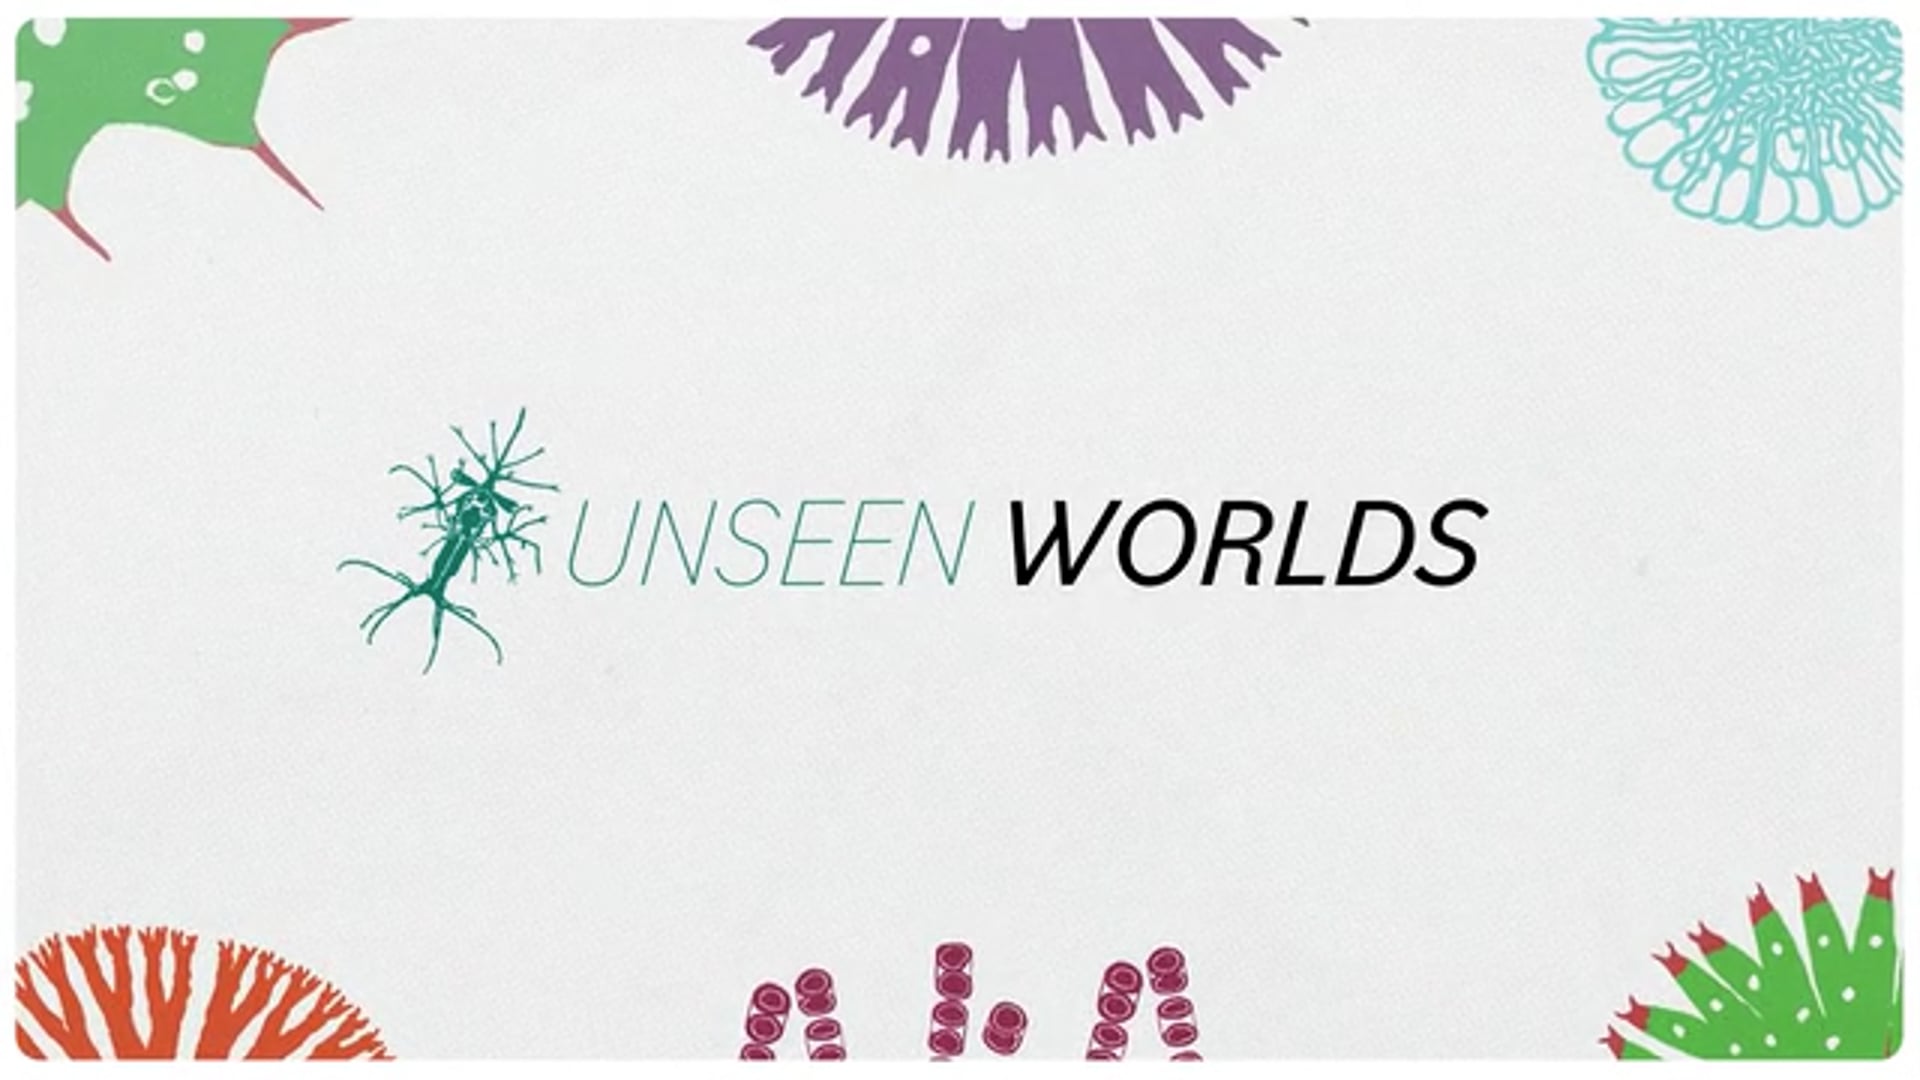 U-M Museum of Natural History | Unseen Worlds